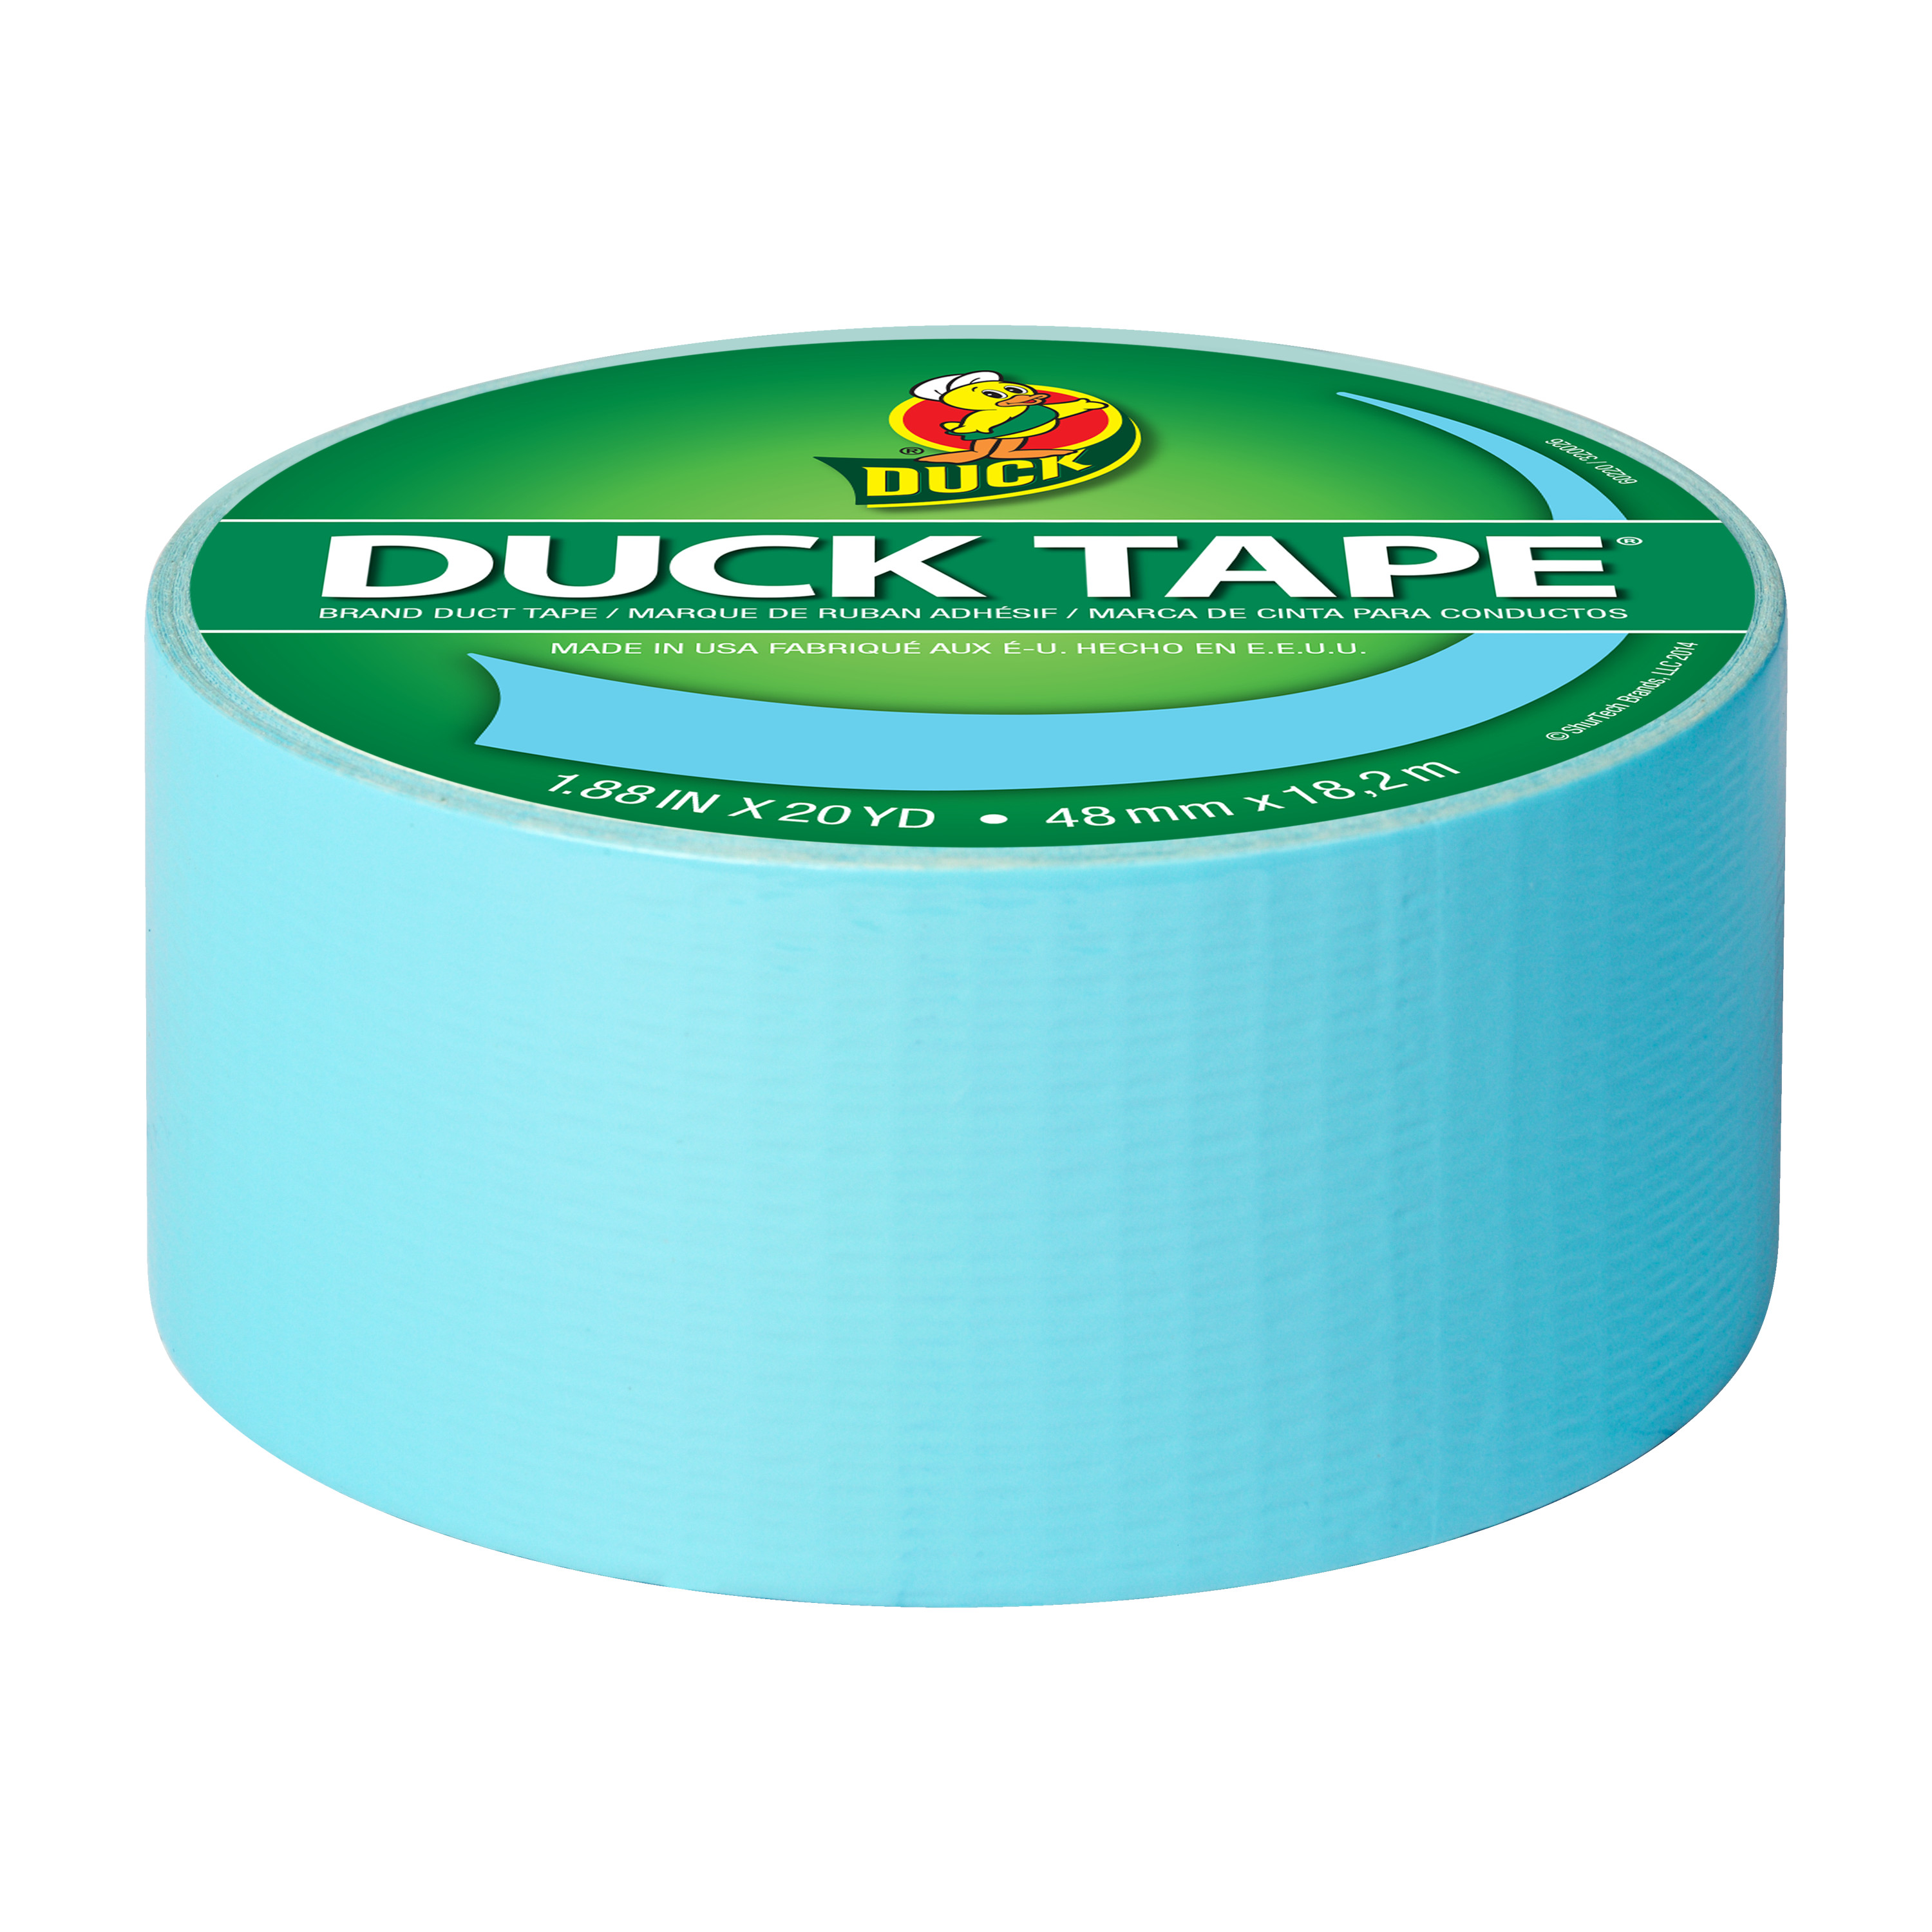 Duck Brand 1.88 in. x 20 yd. Frozen Blue Colored Duct Tape, 3 Pack - image 4 of 7